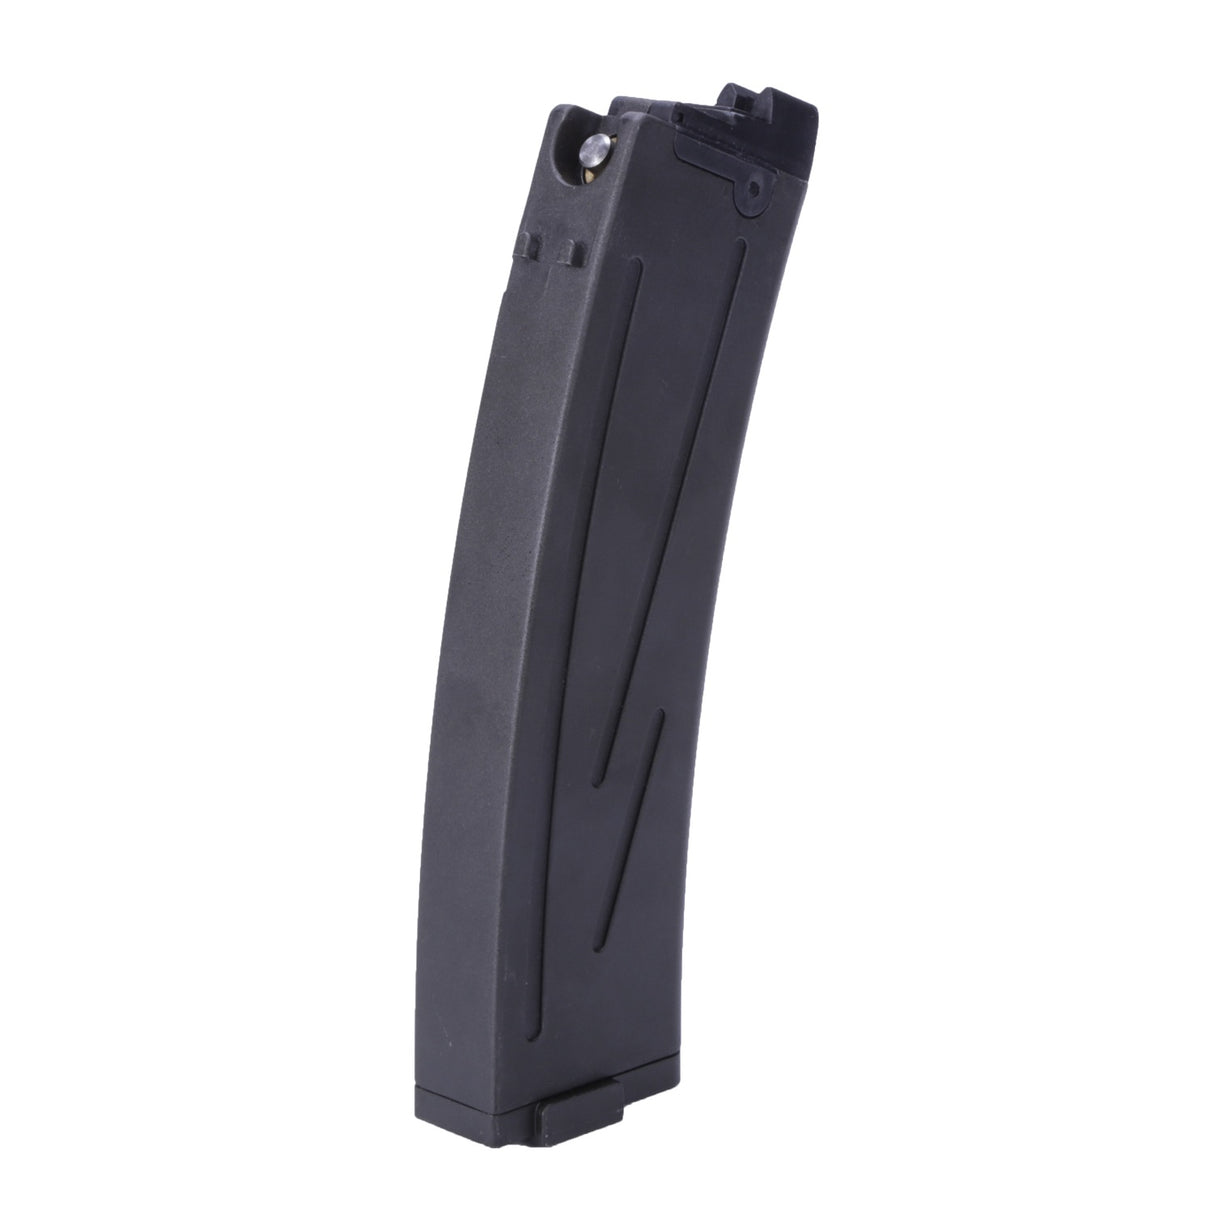 King Arms 35 Rounds Gas Magazine for M1 / M2 Carbine GBB ( MAG-90 )